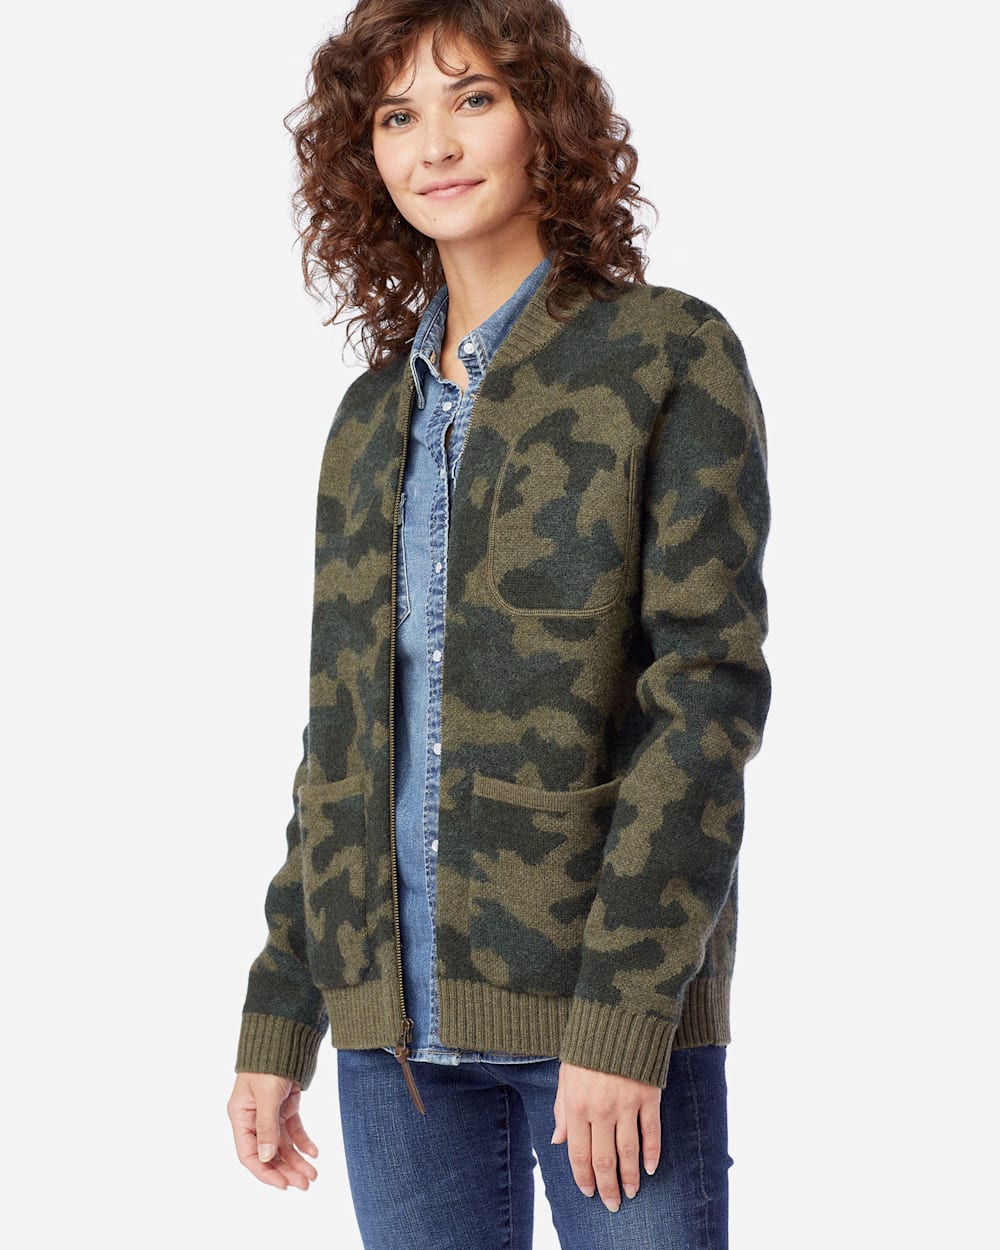 WOMEN'S BOILED WOOL BOMBER JACKET IN OLIVE CAMO image number 1